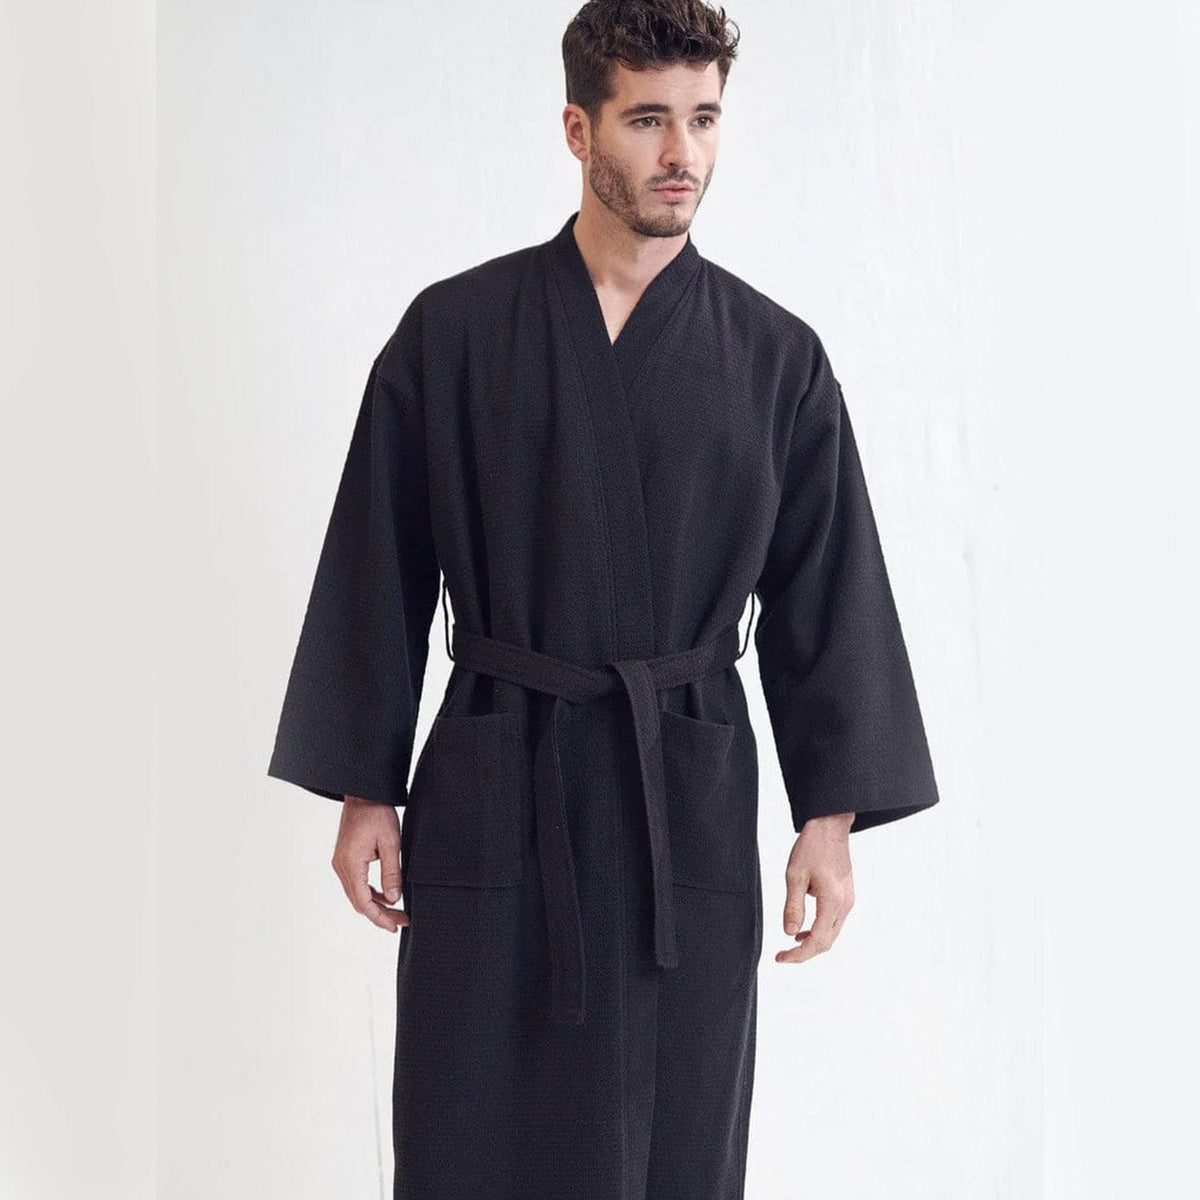 Buy Turkish Soft Cotton Black and Caramel Colour Jacquard Lightweight Shawl  Collar Bathrobe, Dressing Gown. Online in India - Etsy